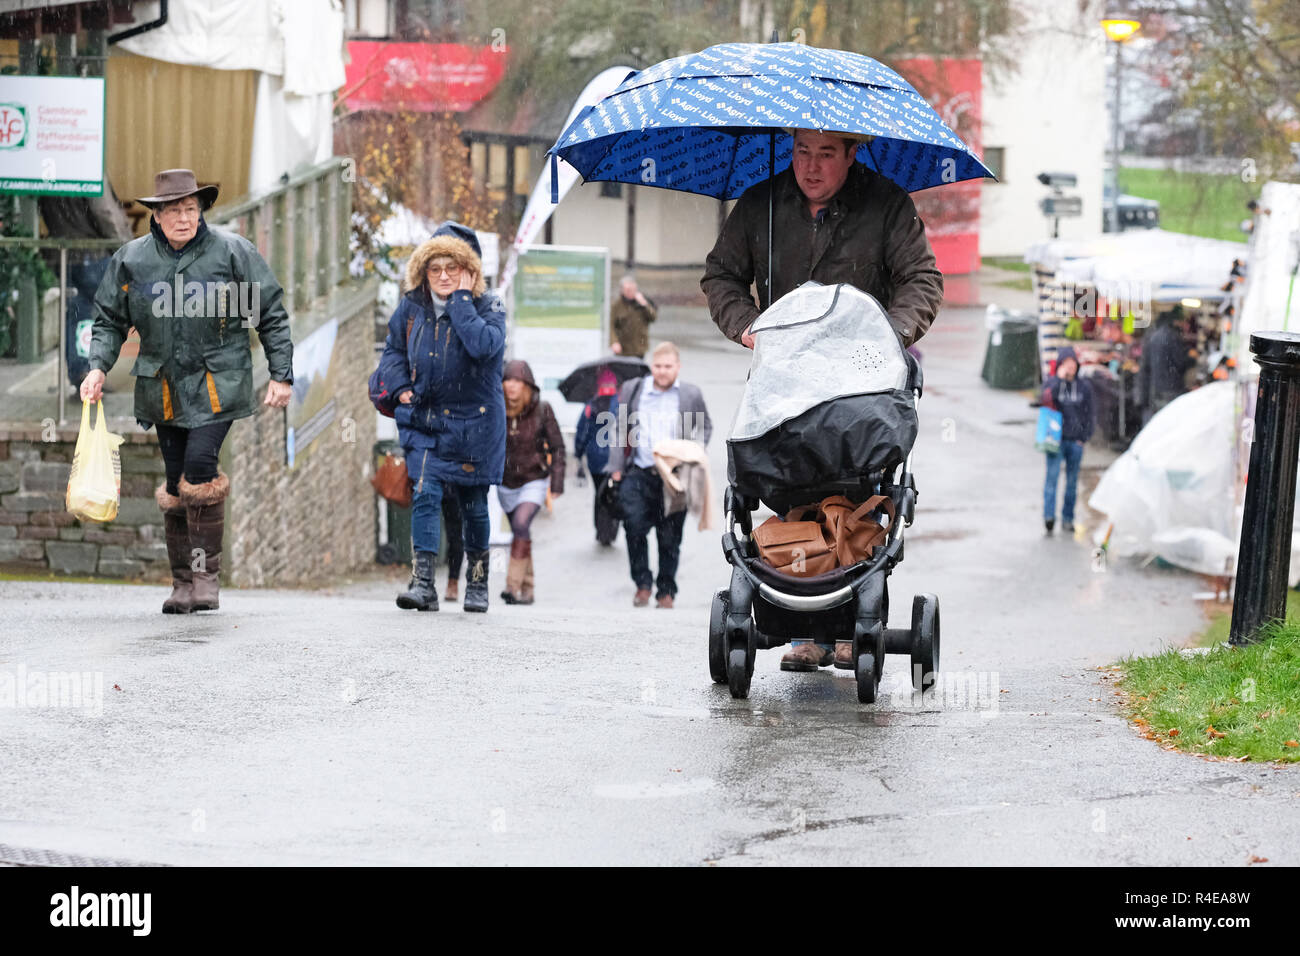 Royal Welsh Showground, Builth Wells, Powys, Wales - Tuesday 27th November 2018 - UK Weather - Visitors to the Royal Welsh Winter Fair battle rain and cold wind on the second day of the Winter Fair - Photo Steven May / Alamy Live News Stock Photo